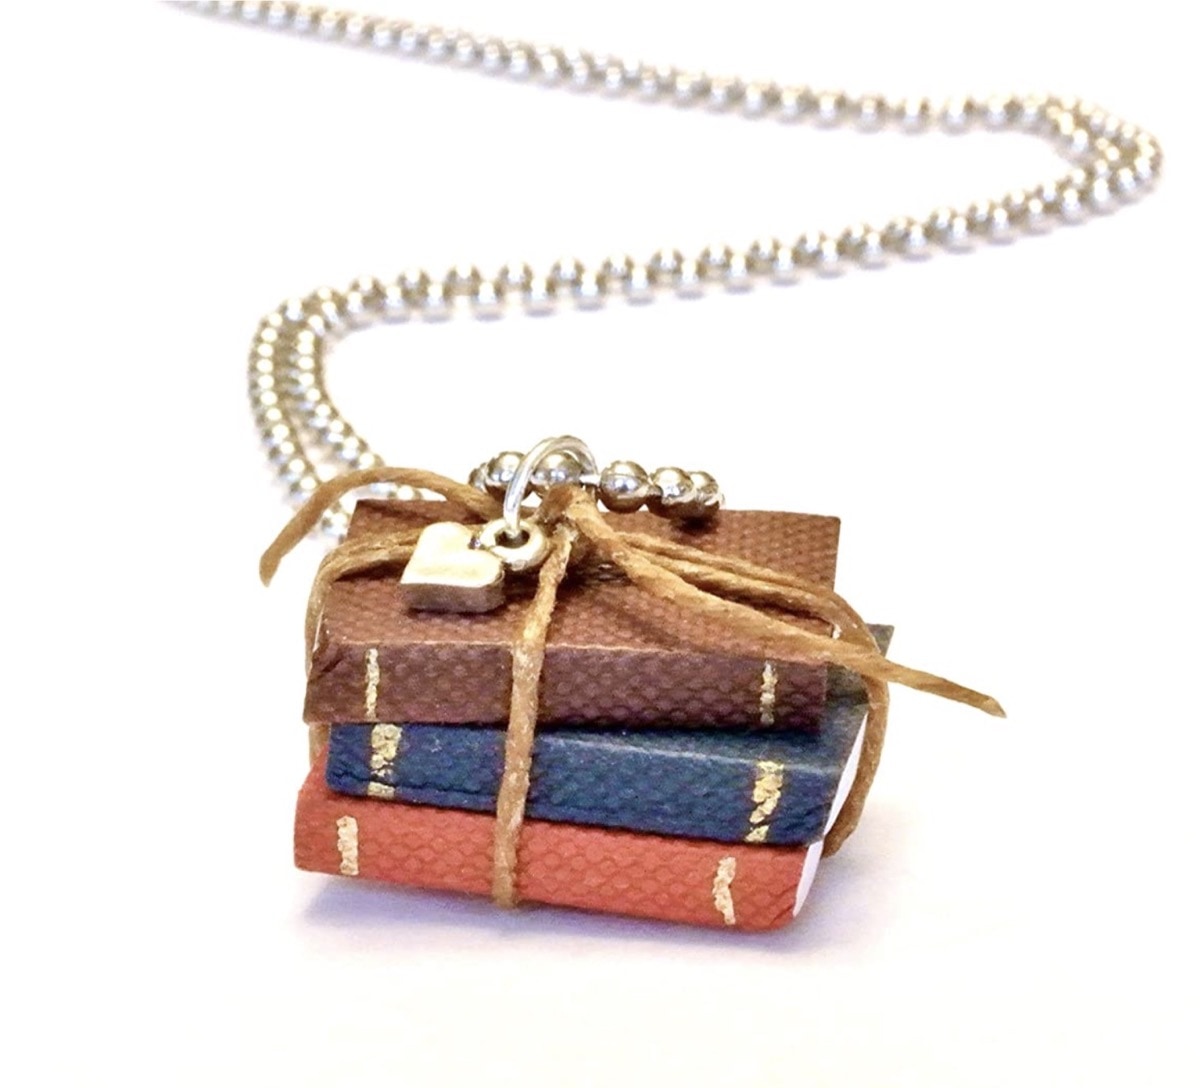 Miniature book jewelry - gifts for Kindle lovers